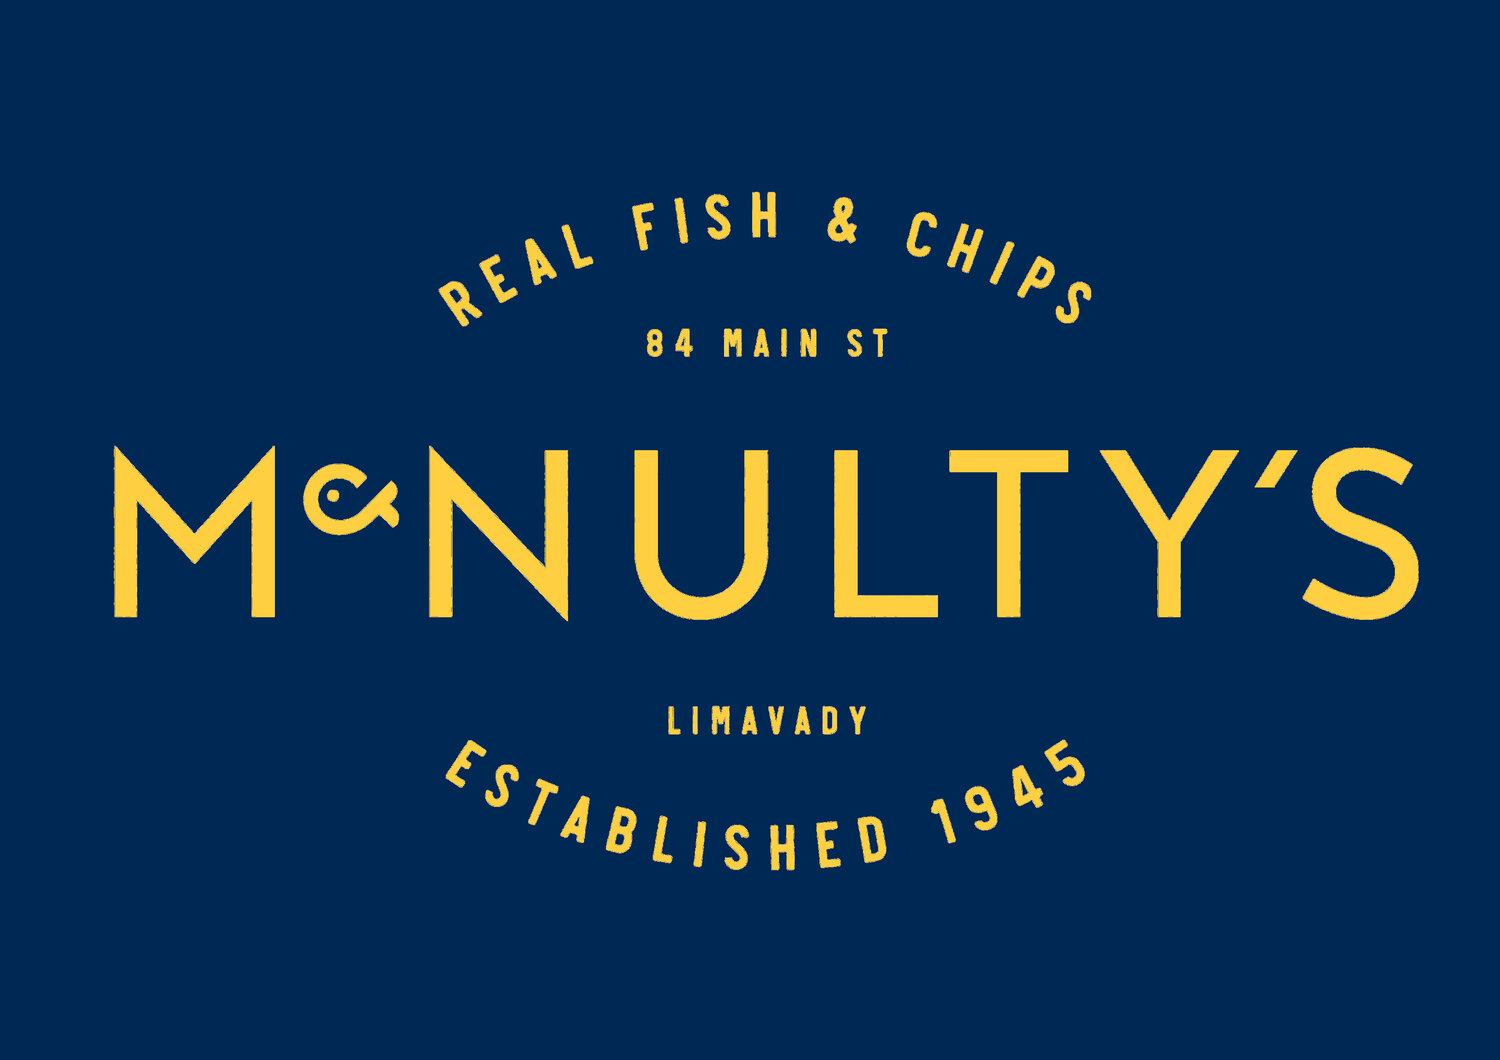 MCNULTYS REAL FISH AND CHIPS